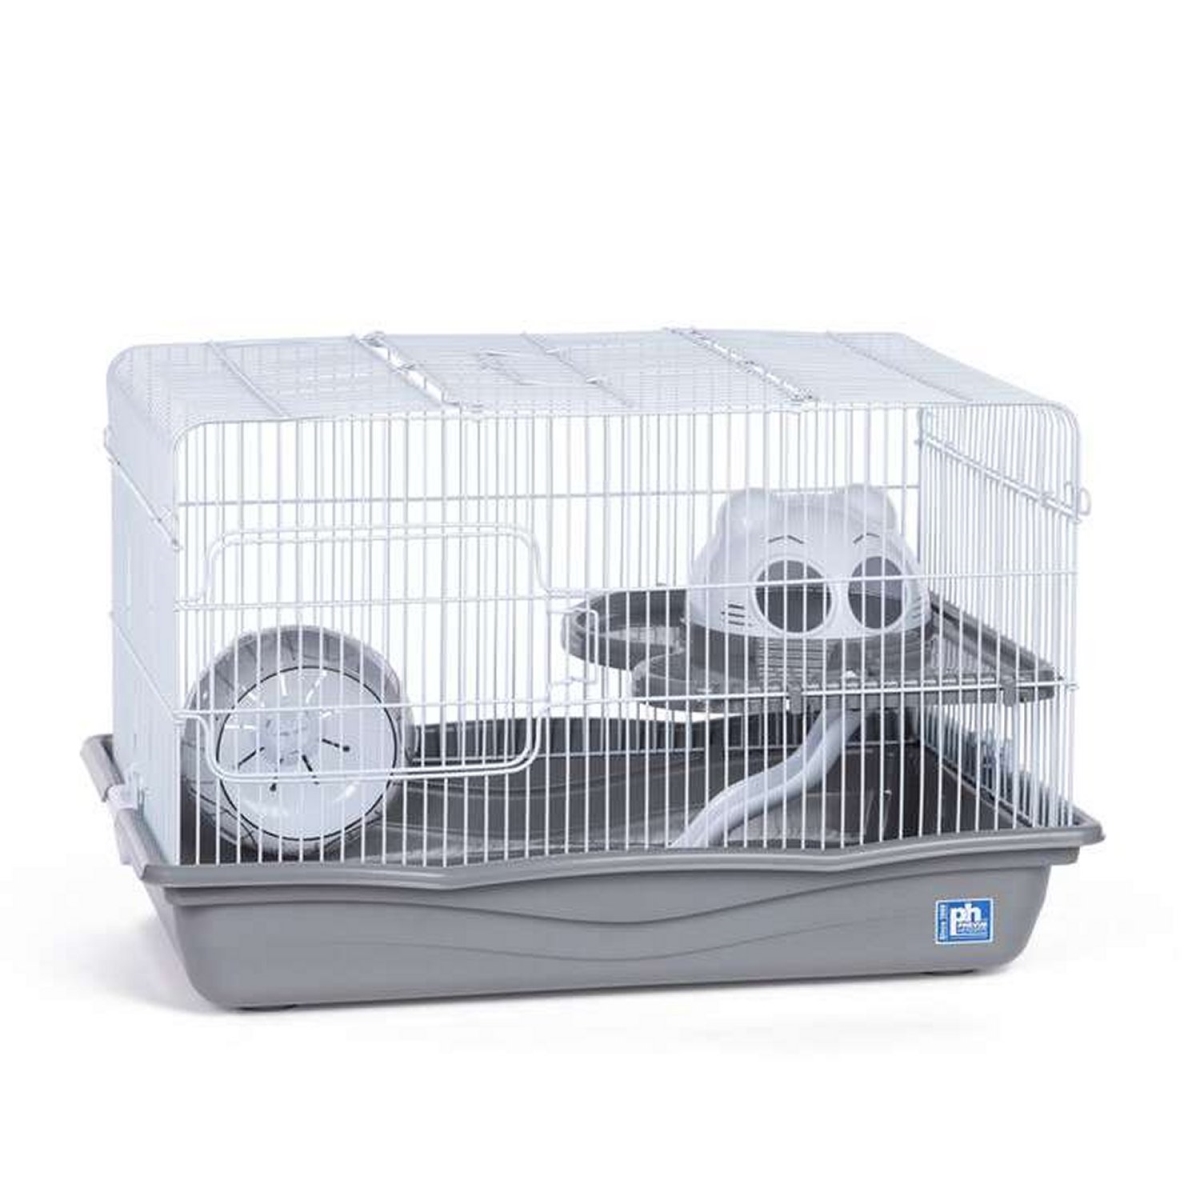 Picture of Prevue Pet Products PP-SP2005GRAY Hamster Haven Cage, Gray - Large